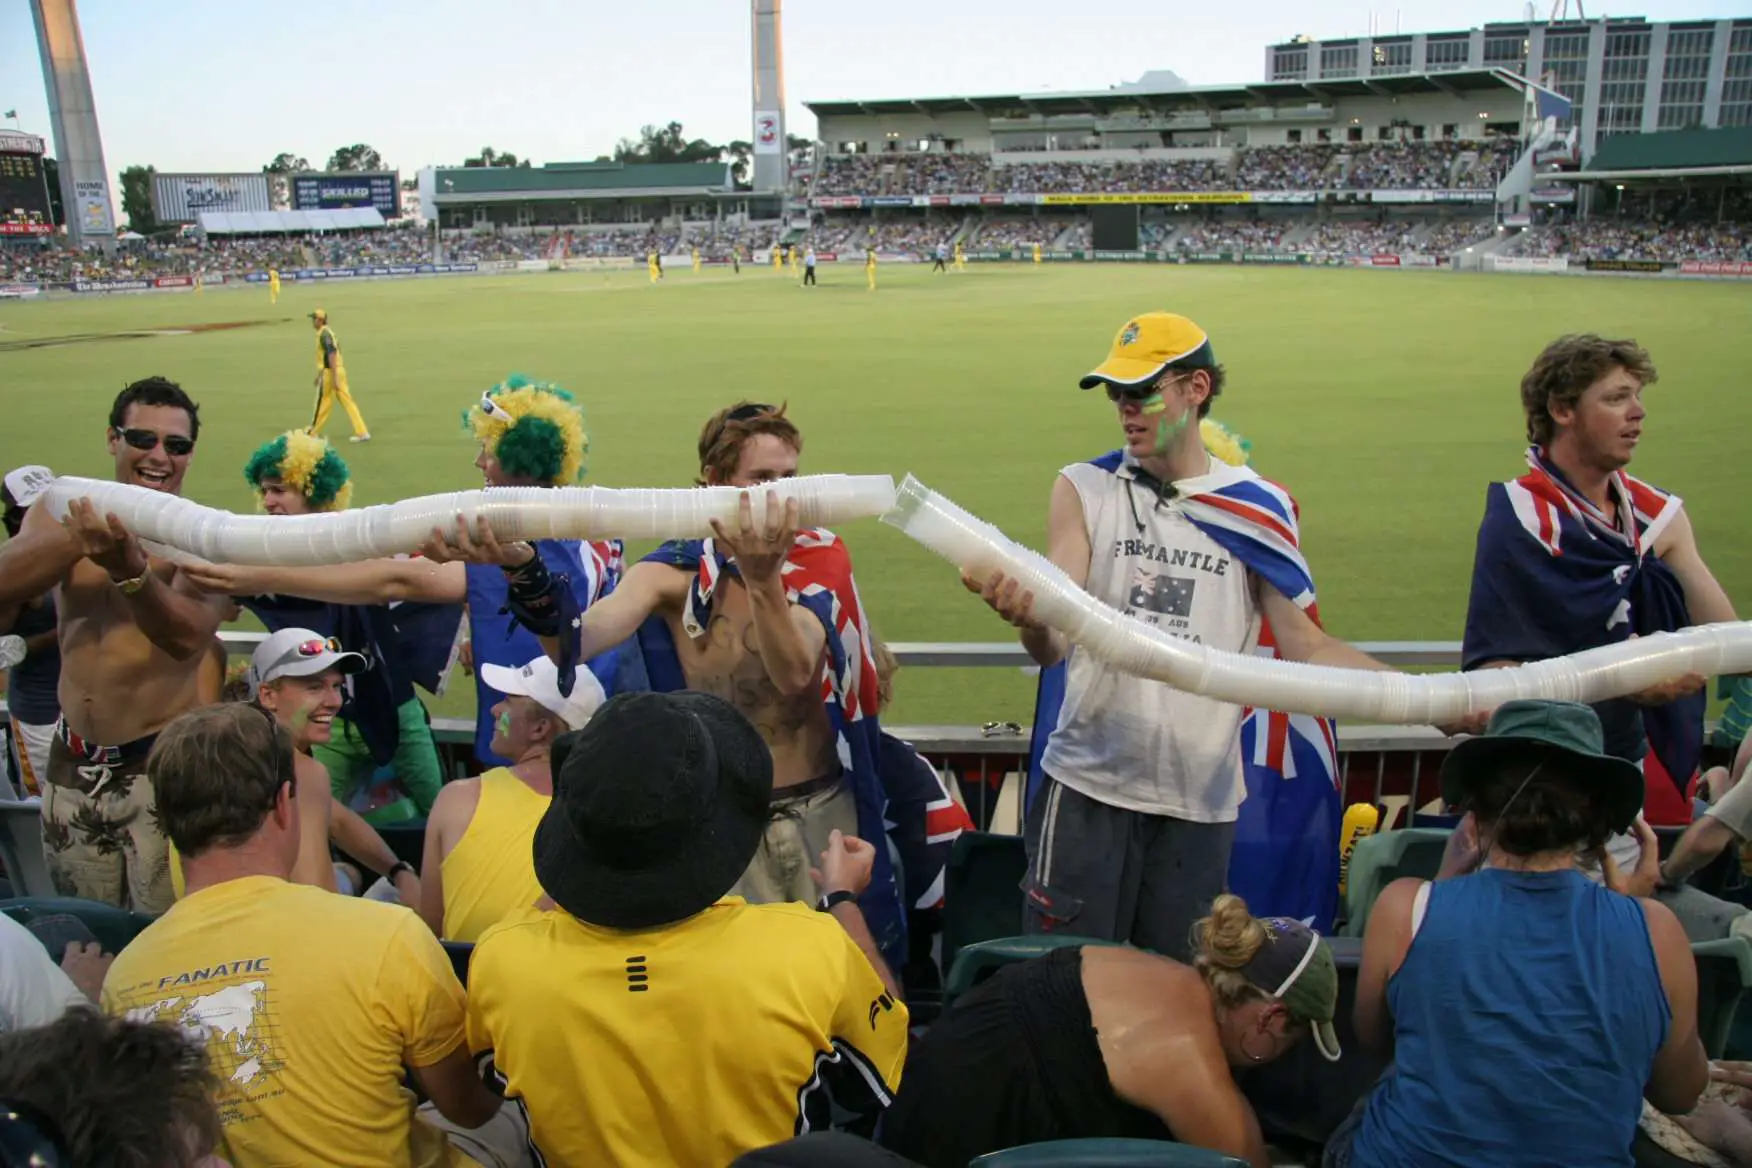 Beer Cup Snake - A Plastic Recycling Option At The Cricket